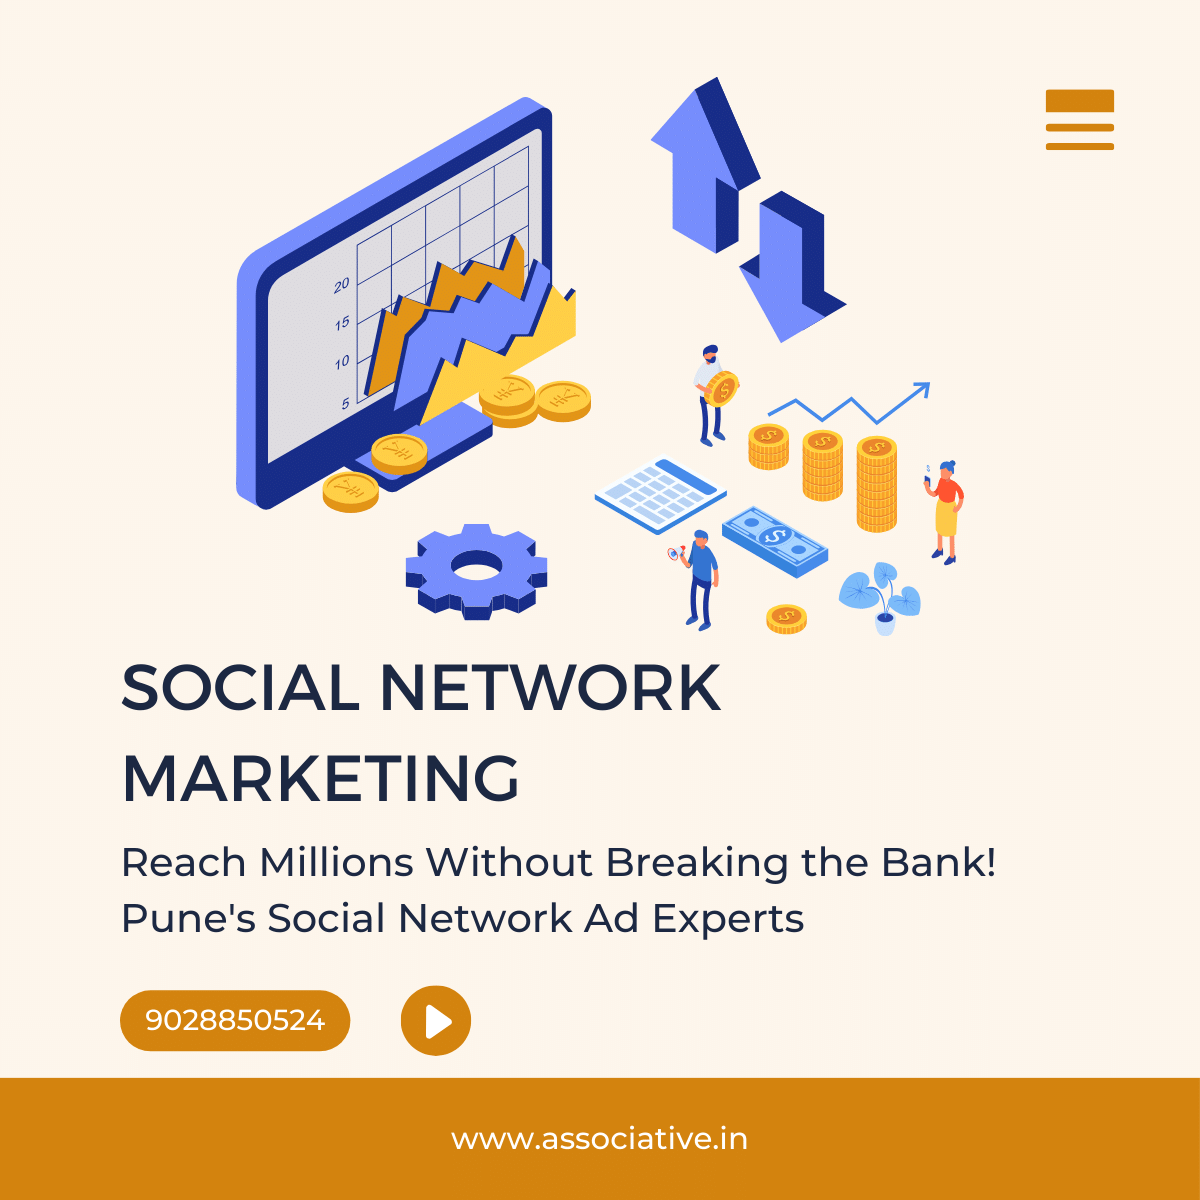 Reach Millions Without Breaking the Bank! Pune's Social Network Ad Experts